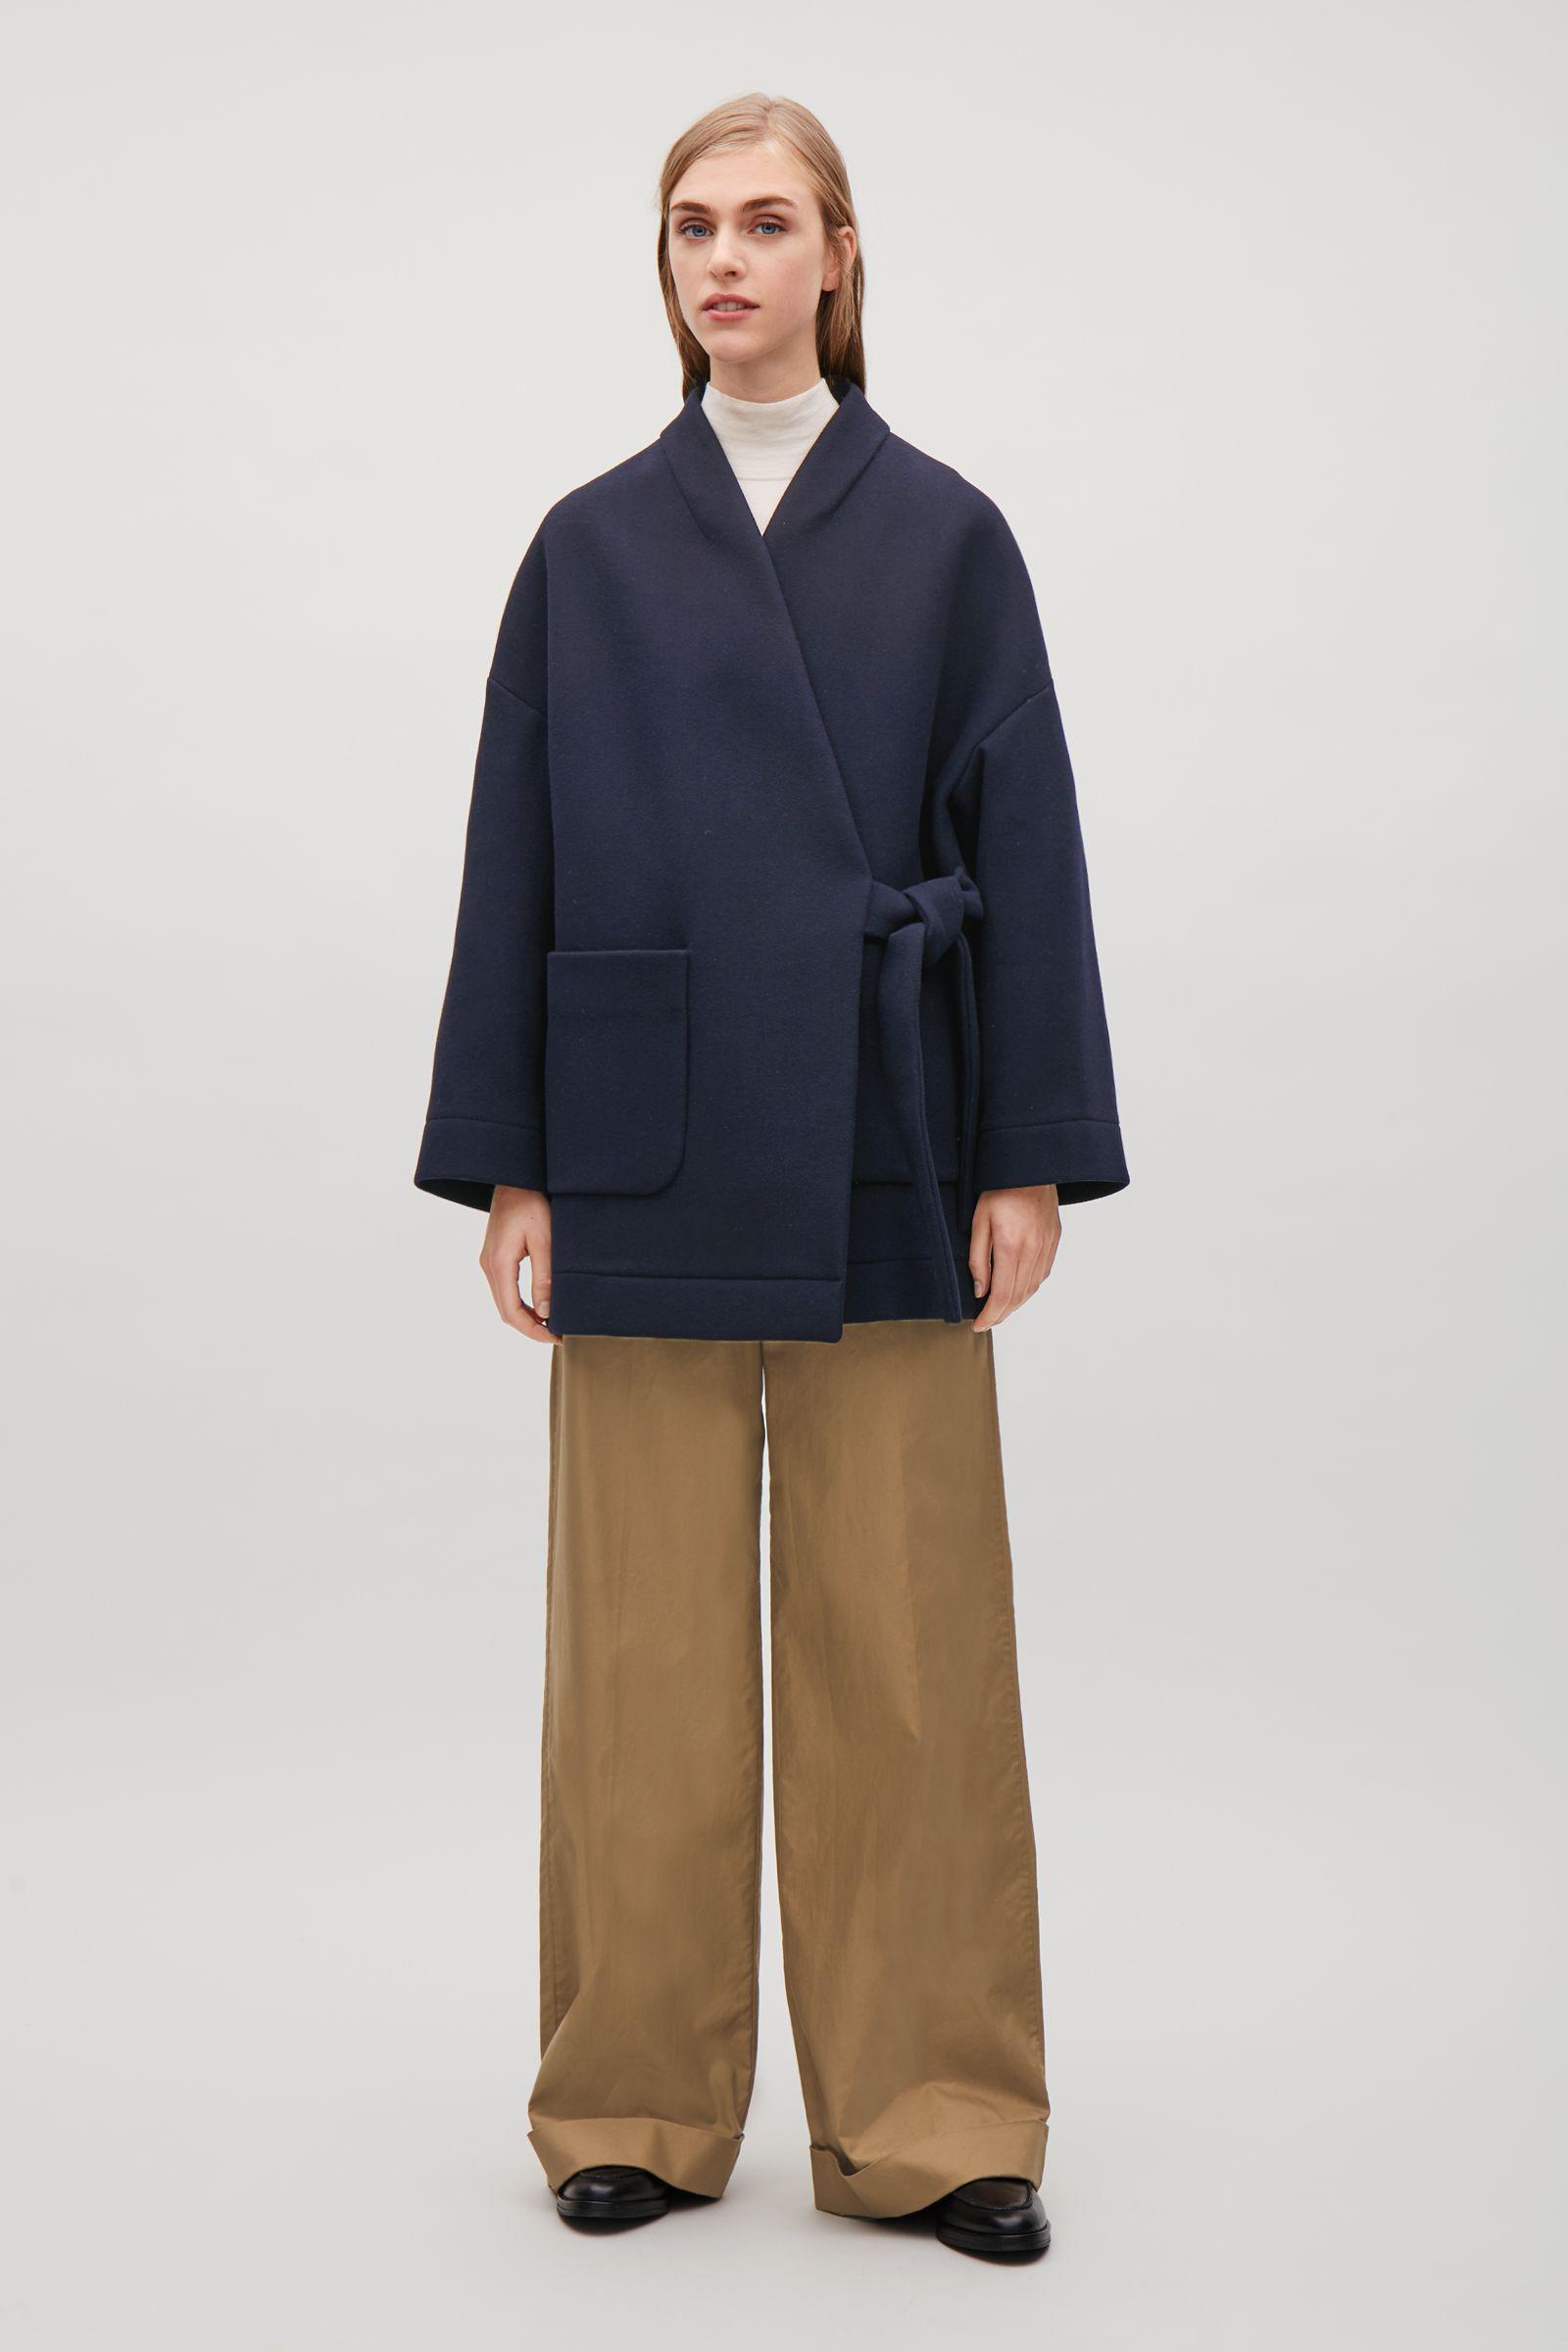 COS Kimono Coat With Side Tie in Blue | Lyst